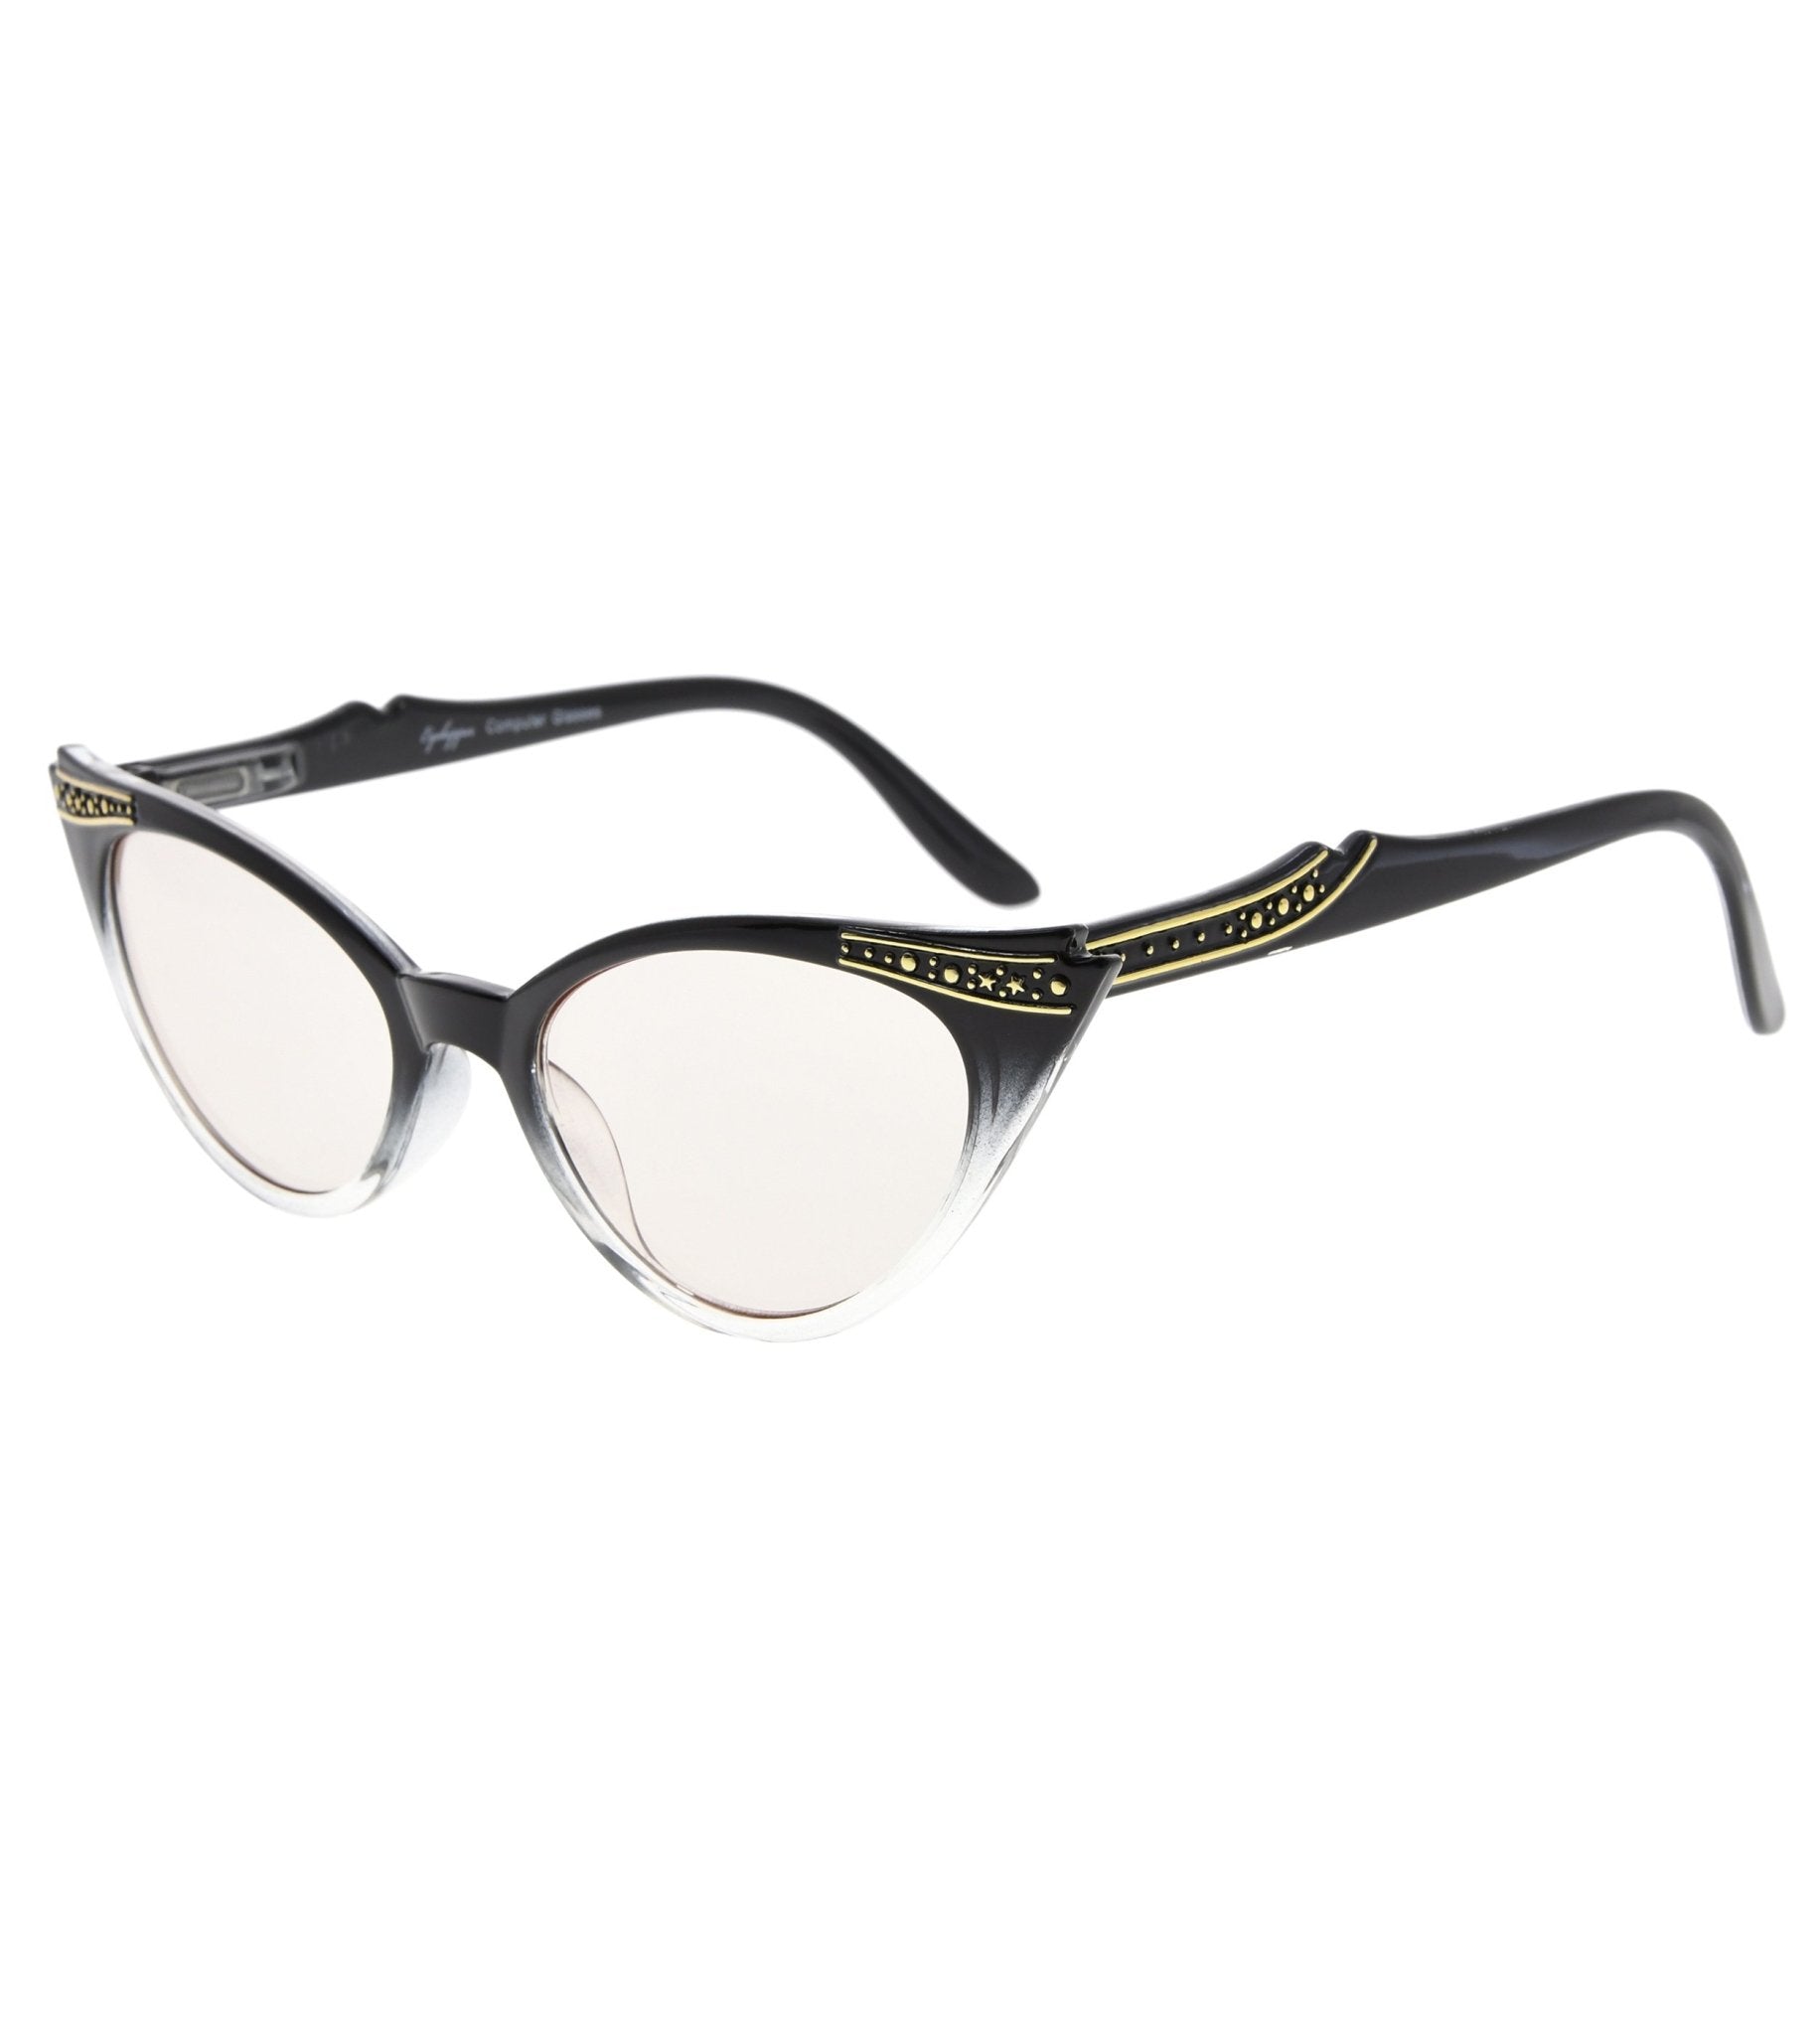 Cateyes Computer Reading Glasses CG914